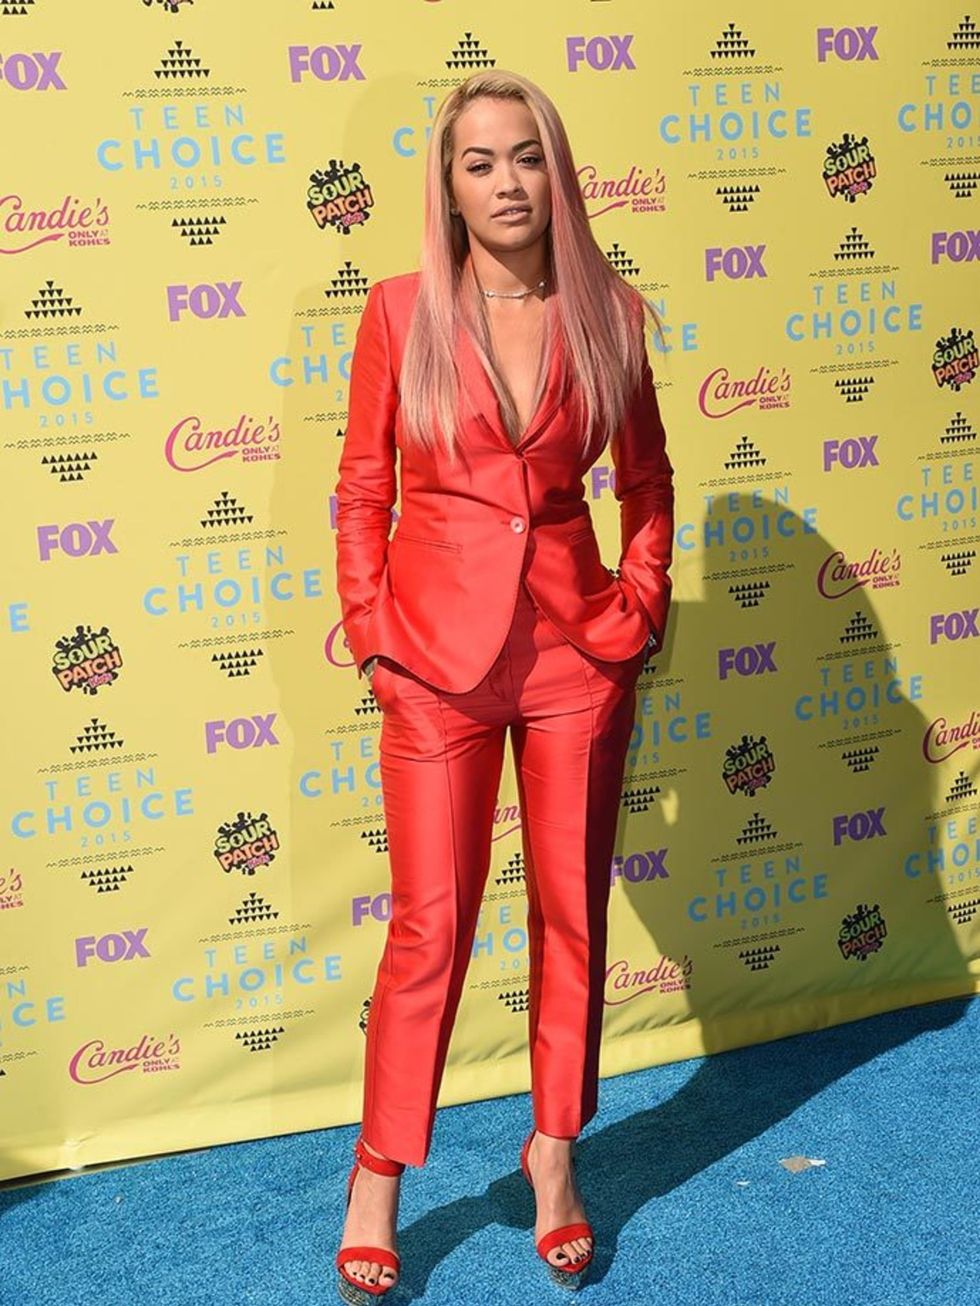 Rita Ora attends the Teen Choice Awards in LA, August 2015.